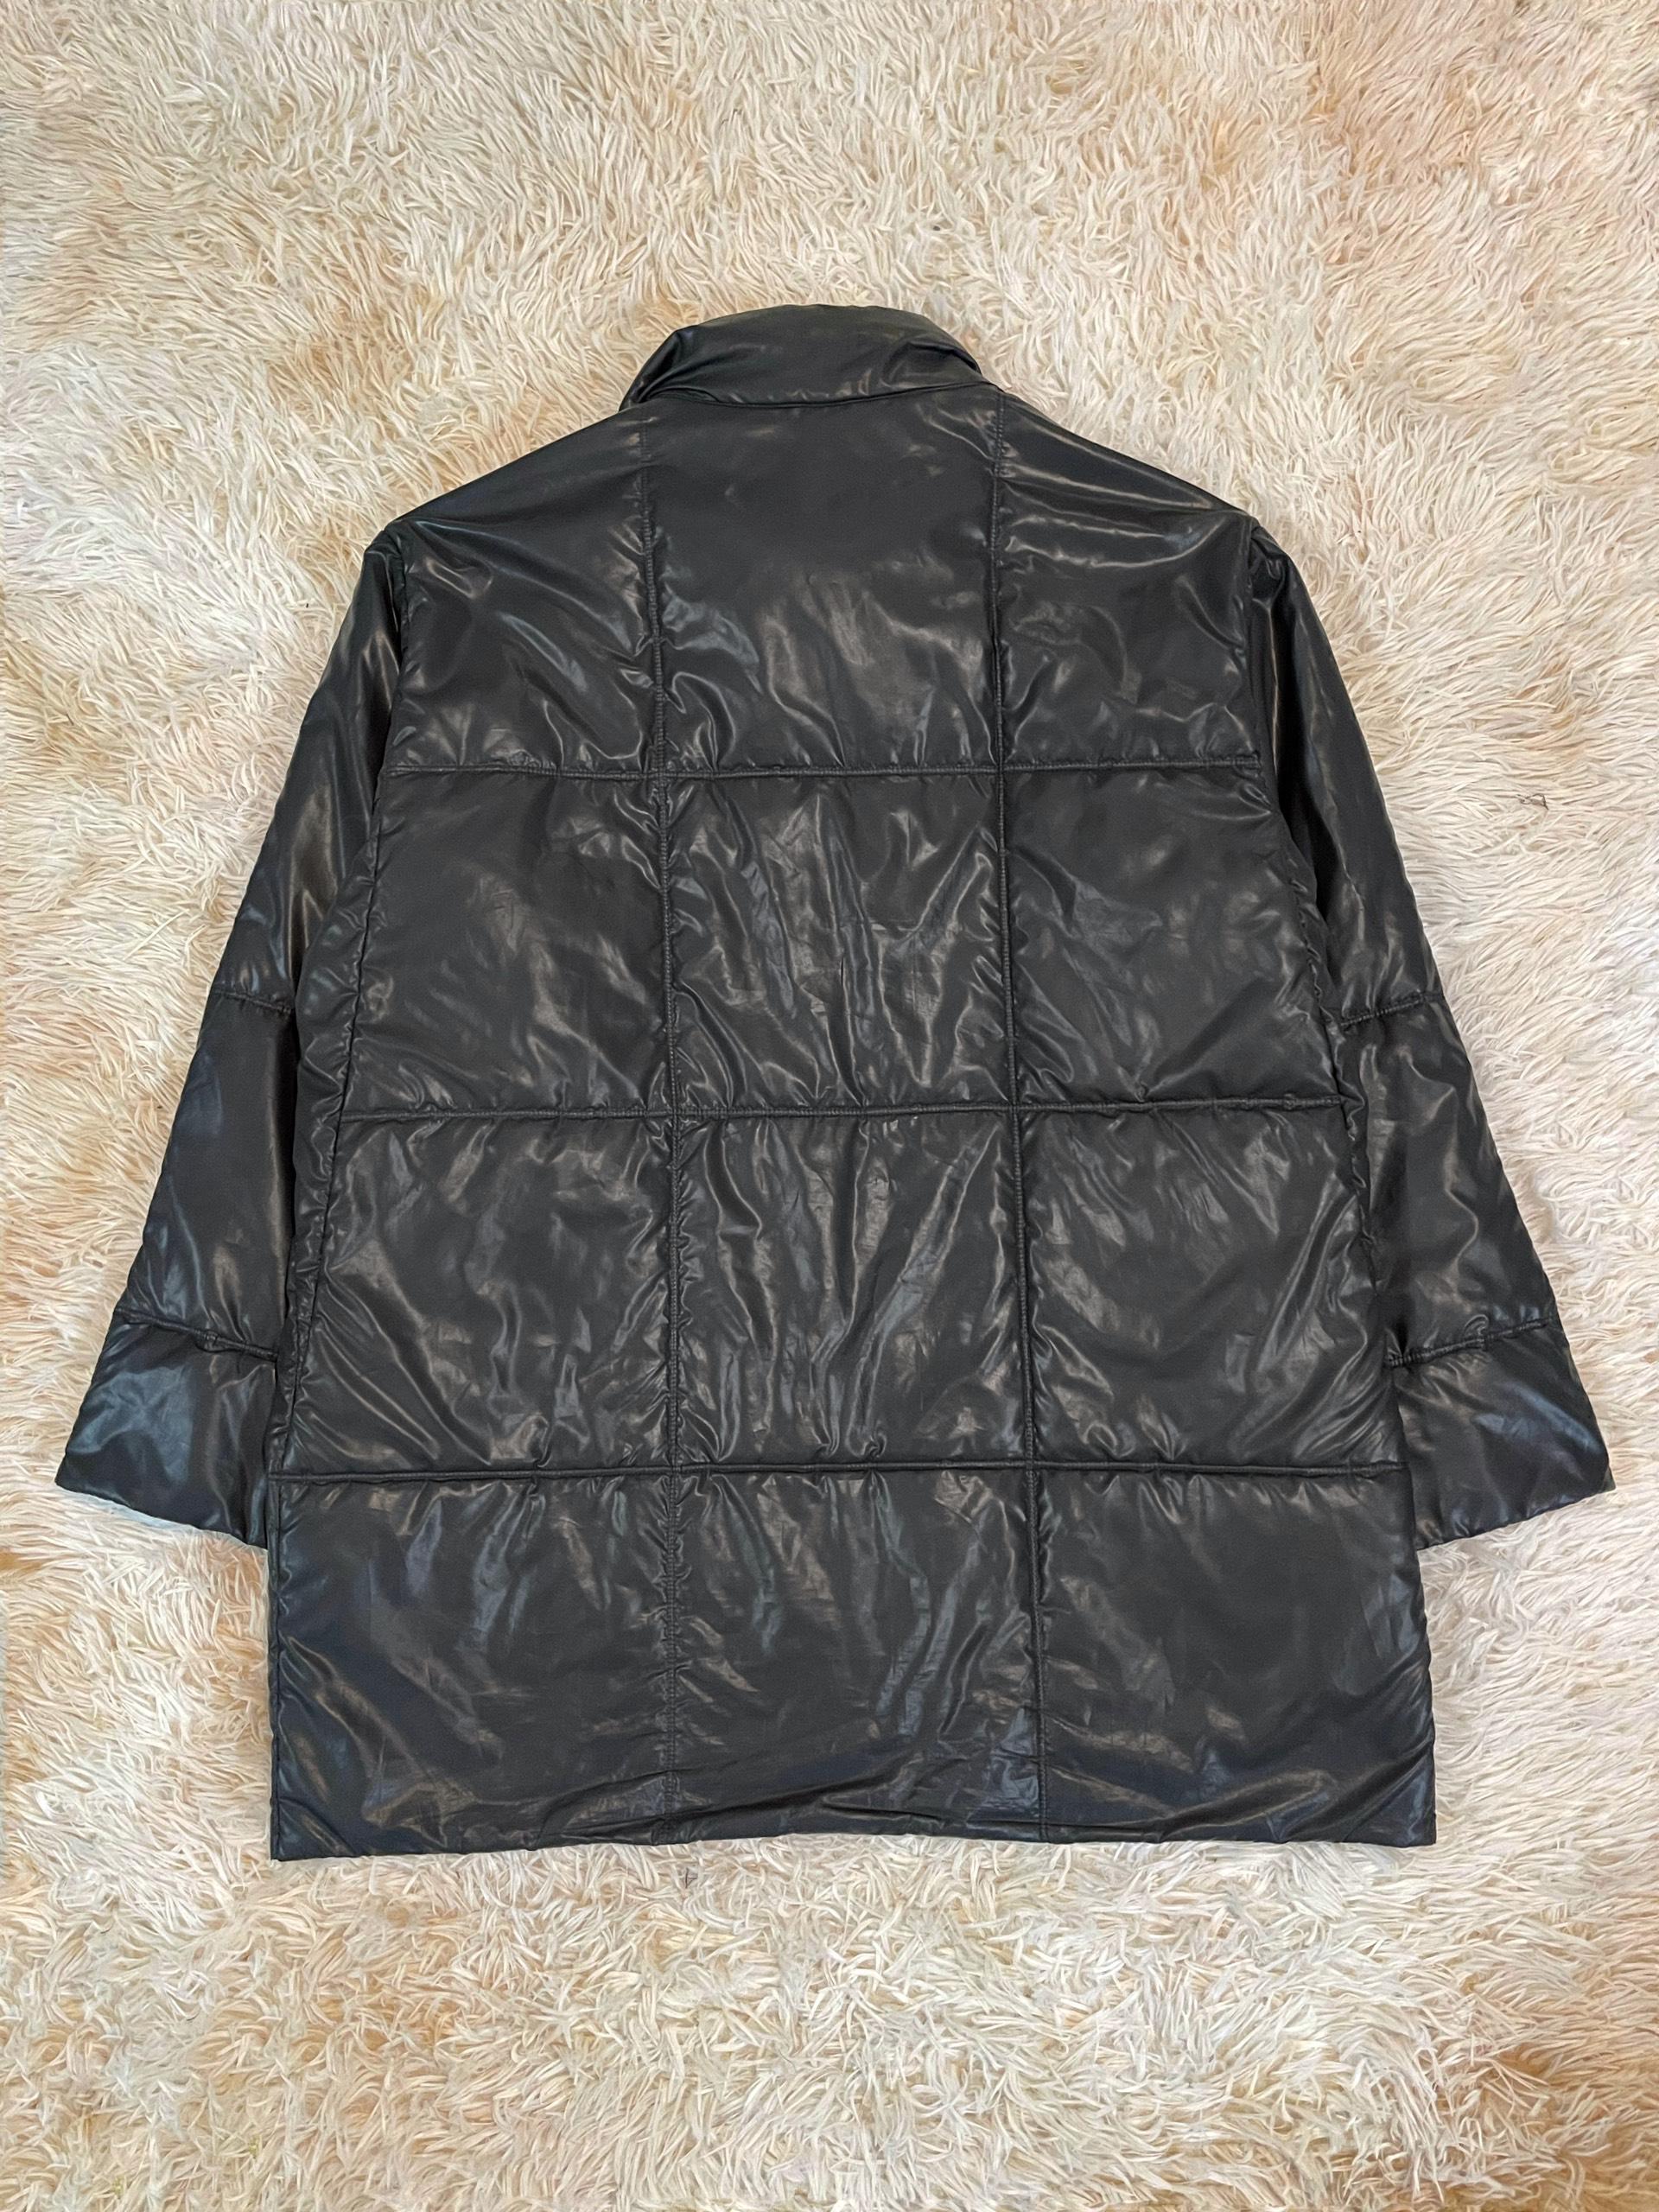 Issey MIyake F/W2001 Pillow Puffer Coat In Excellent Condition For Sale In Tương Mai Ward, Hoang Mai District